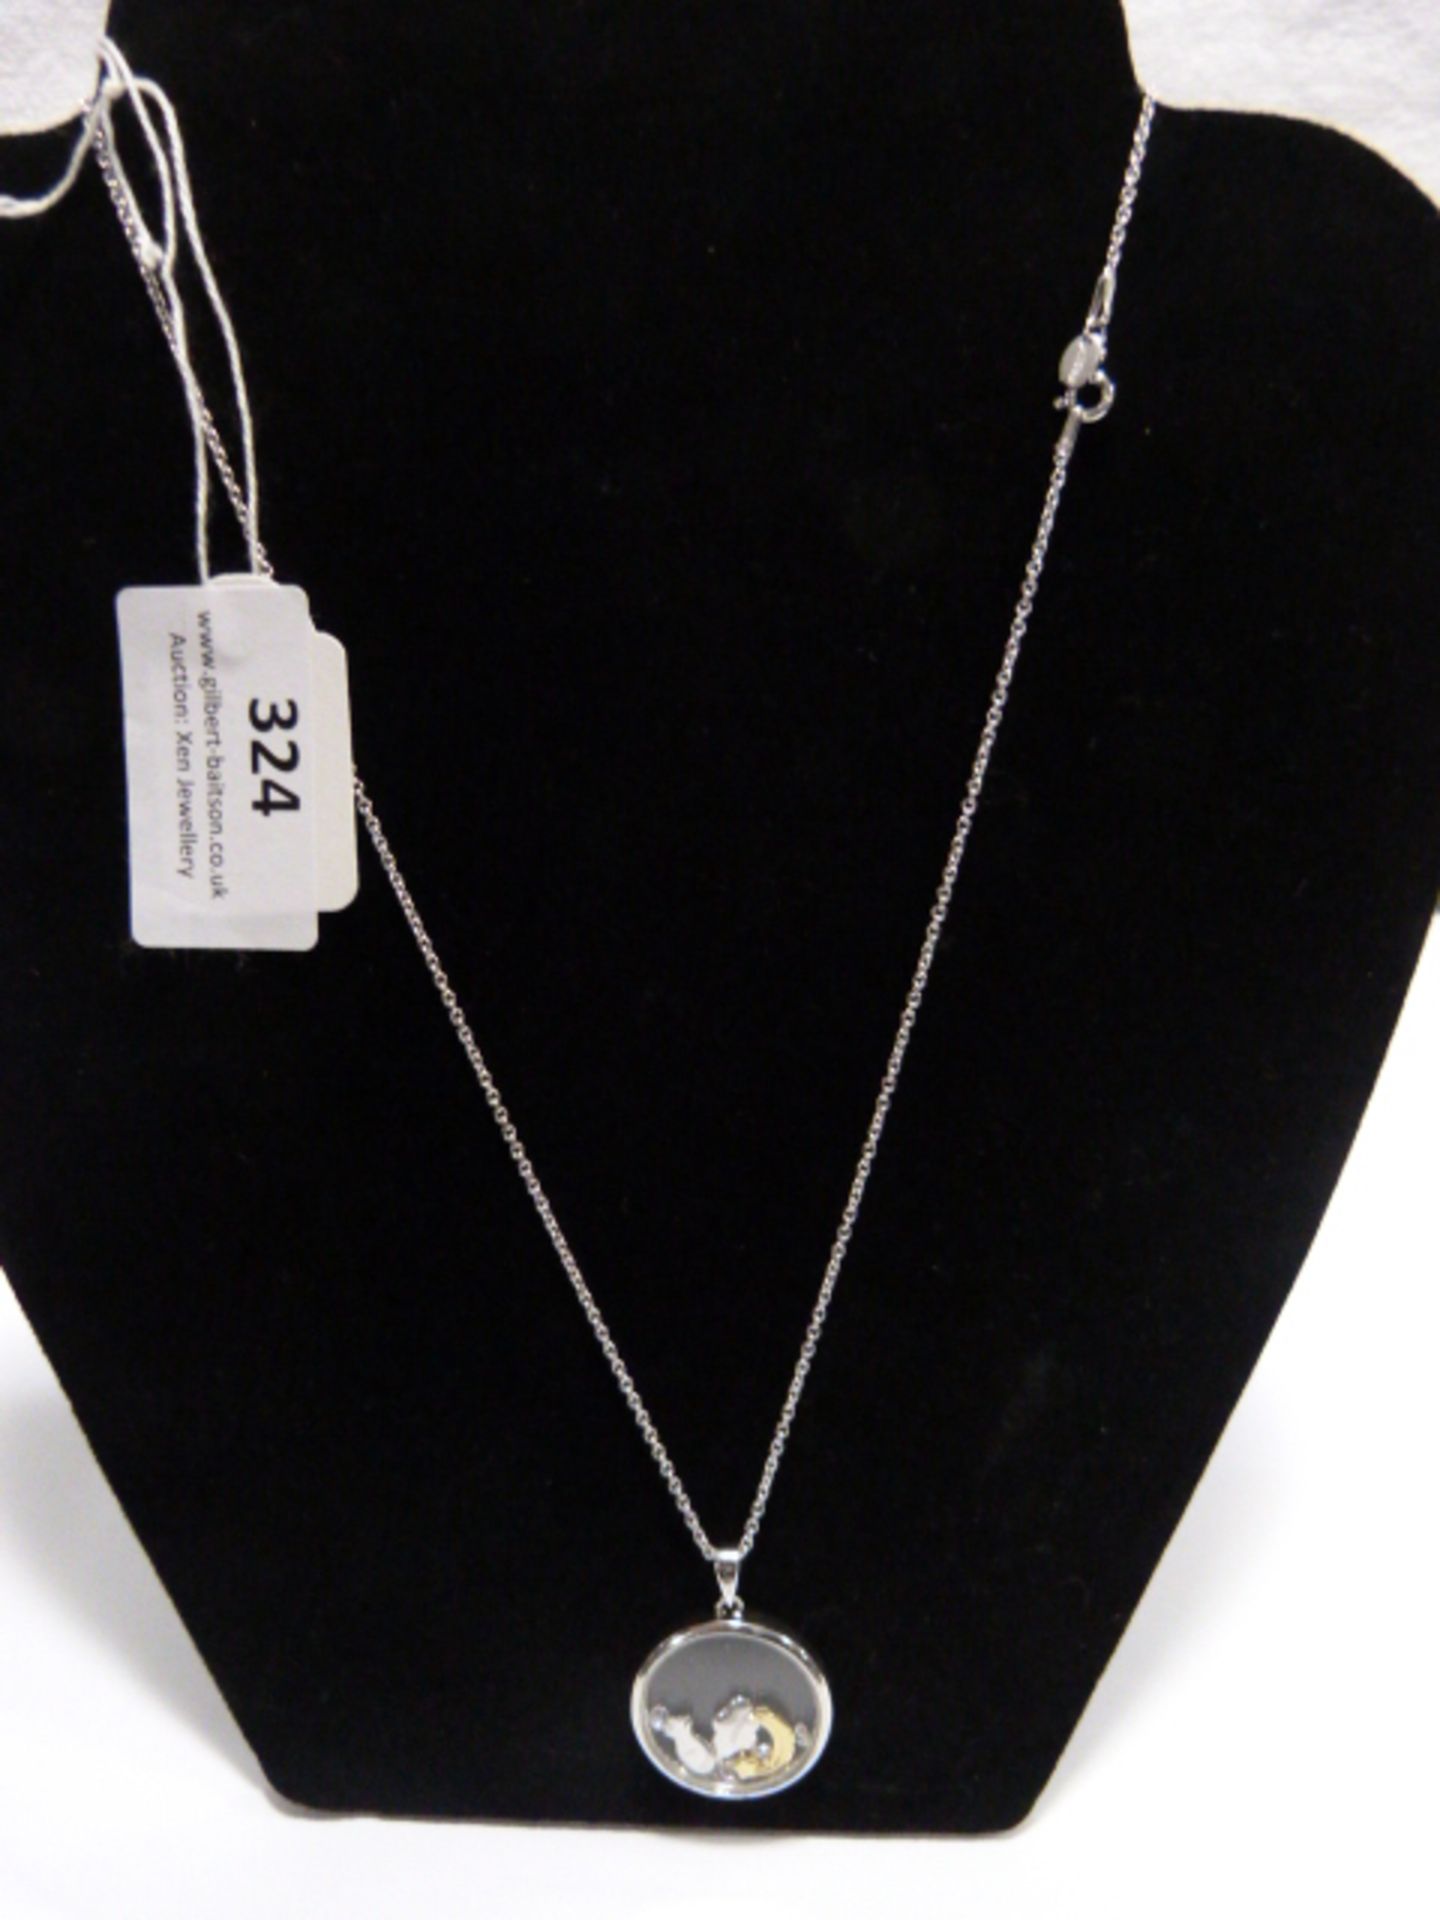 *Astra Silver Necklace with Pendant